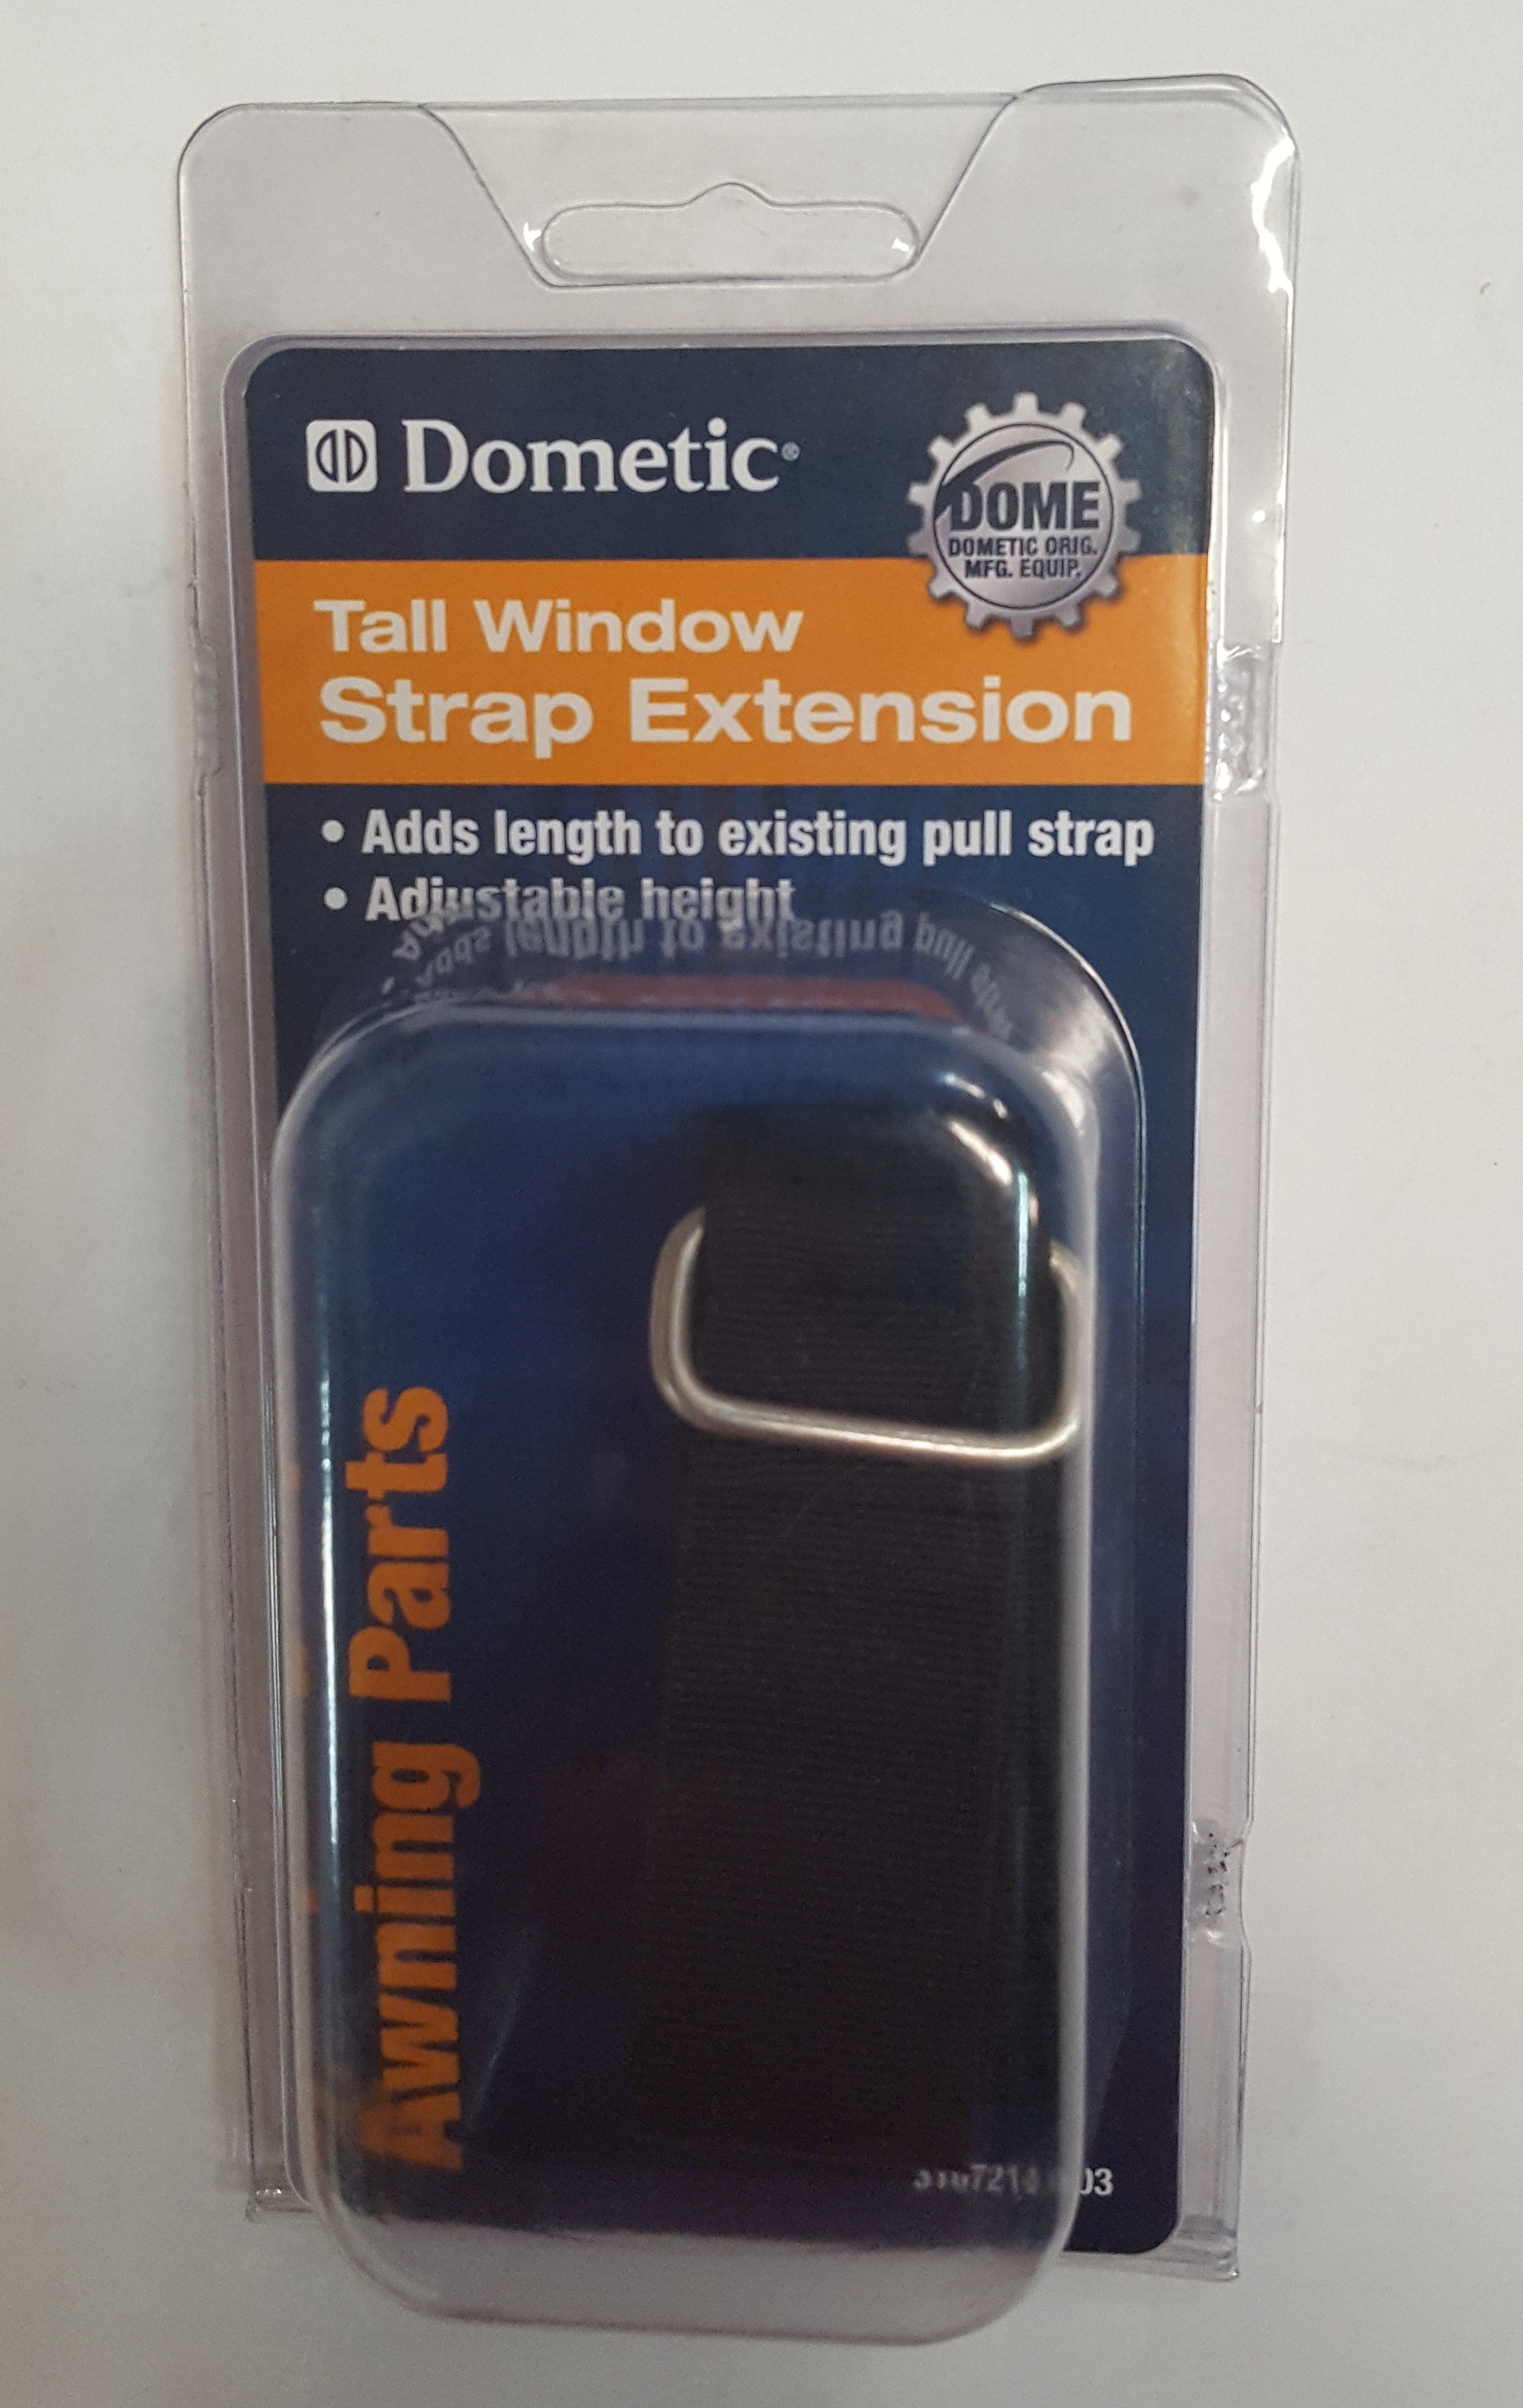 Dometic 3107214003 Awning 18" Black Extension Pull Strap